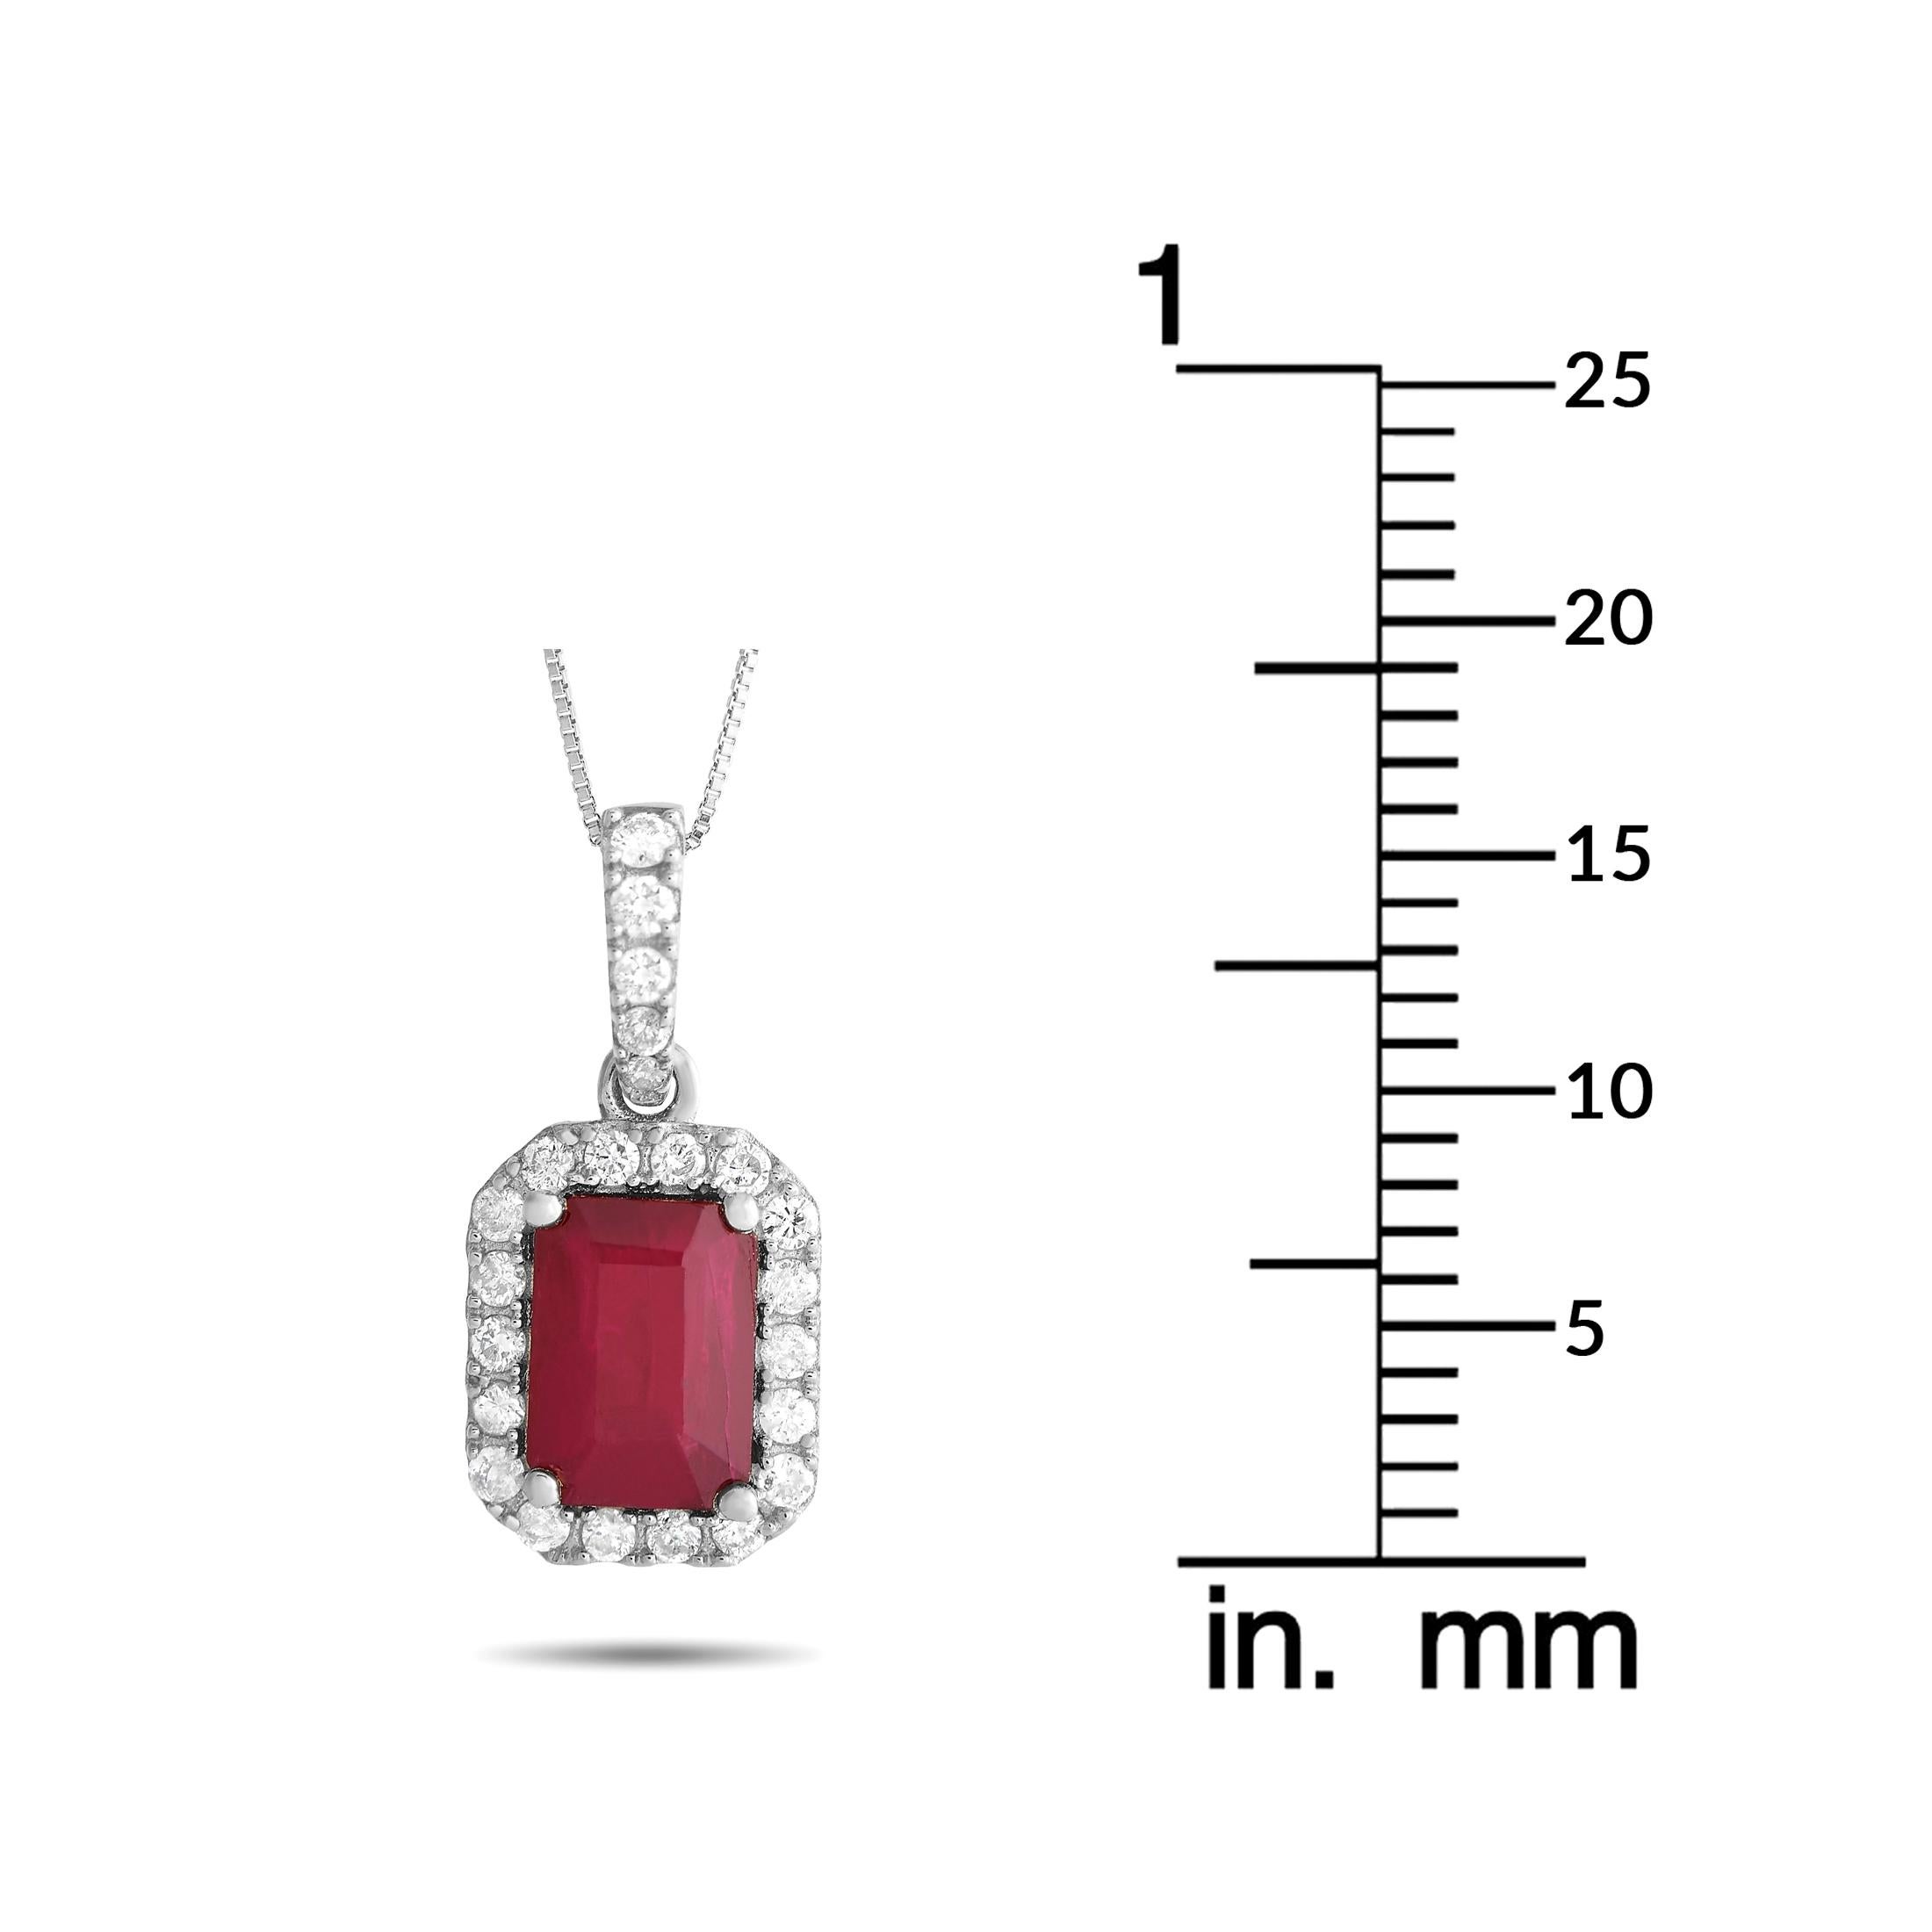 LB Exclusive 14K White Gold 0.20ct Diamond & Ruby Pendant Necklace PD4-15910WRU In New Condition For Sale In Southampton, PA